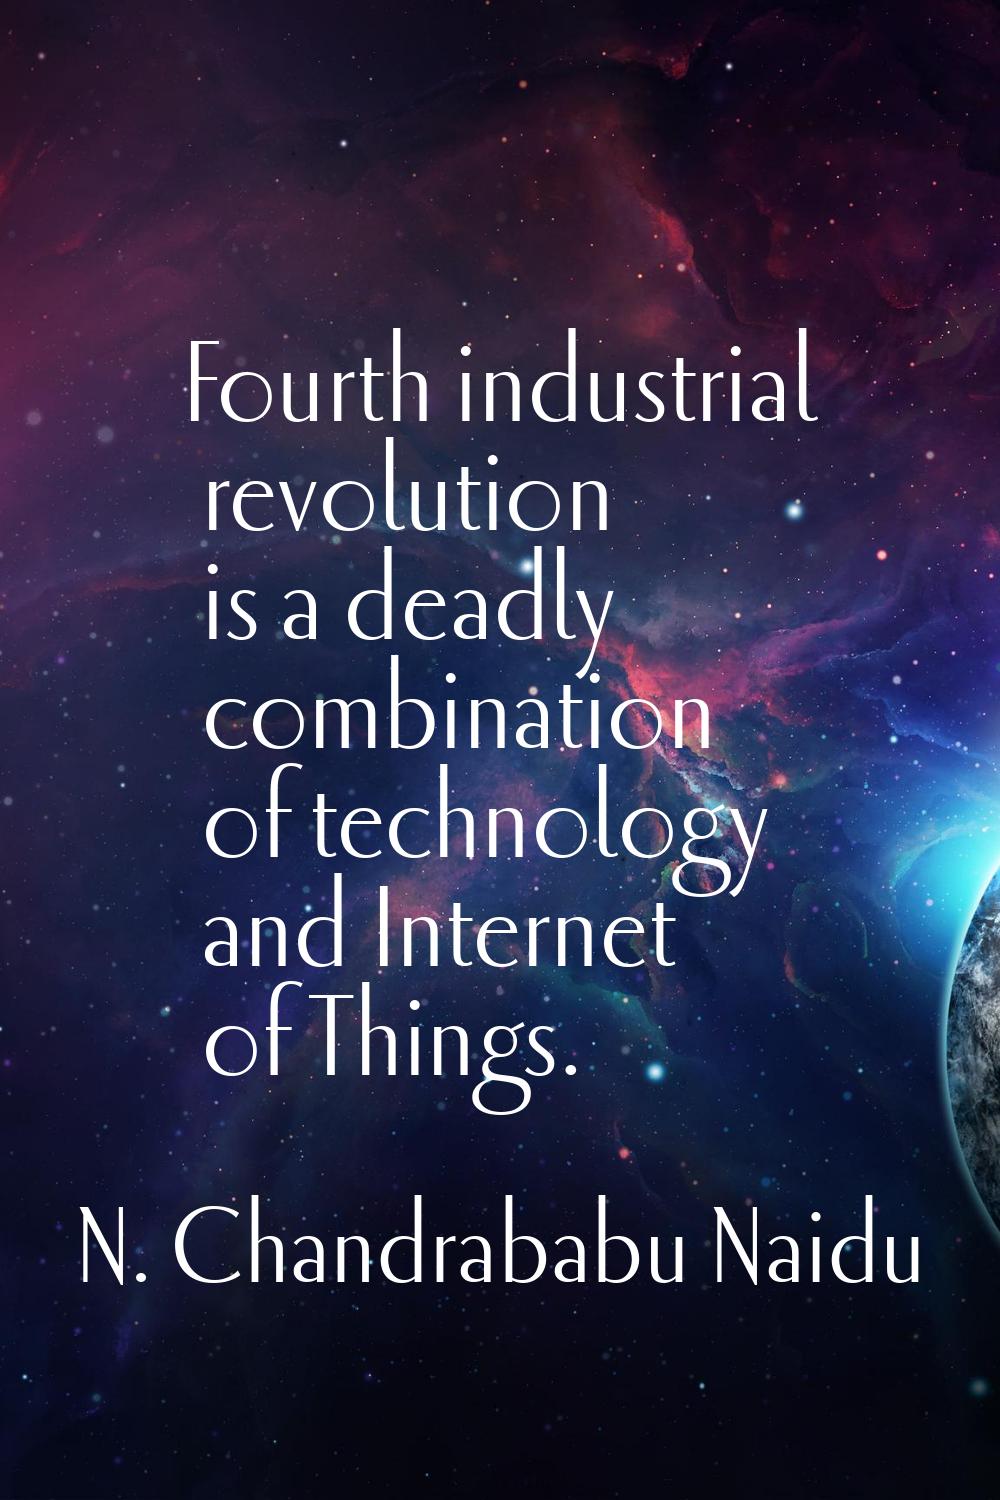 Fourth industrial revolution is a deadly combination of technology and Internet of Things.